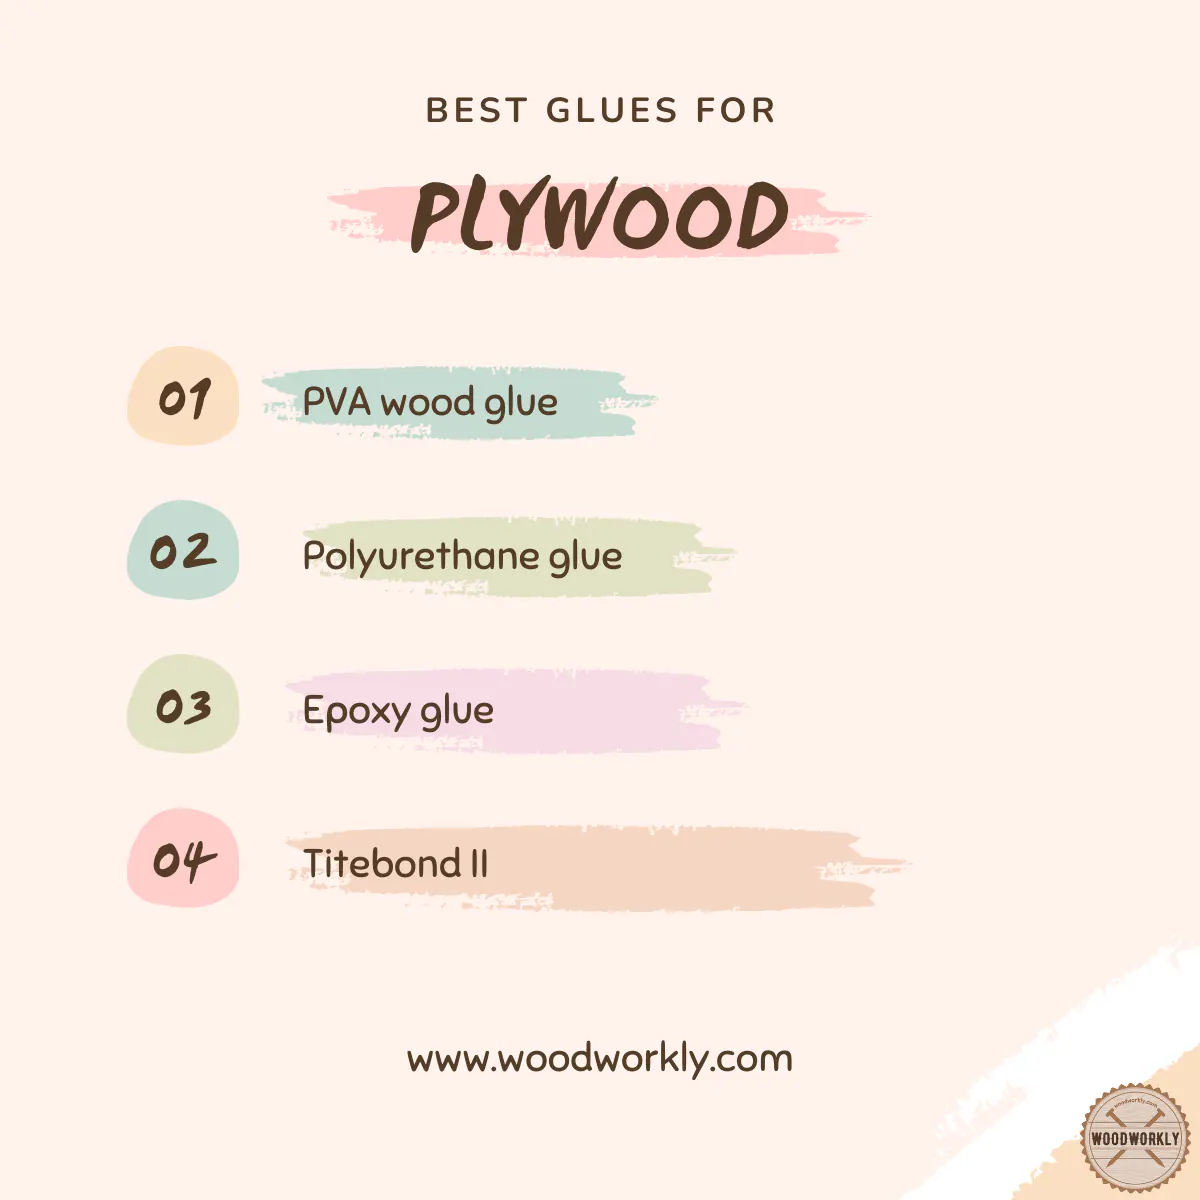 Glues that can use for plywood